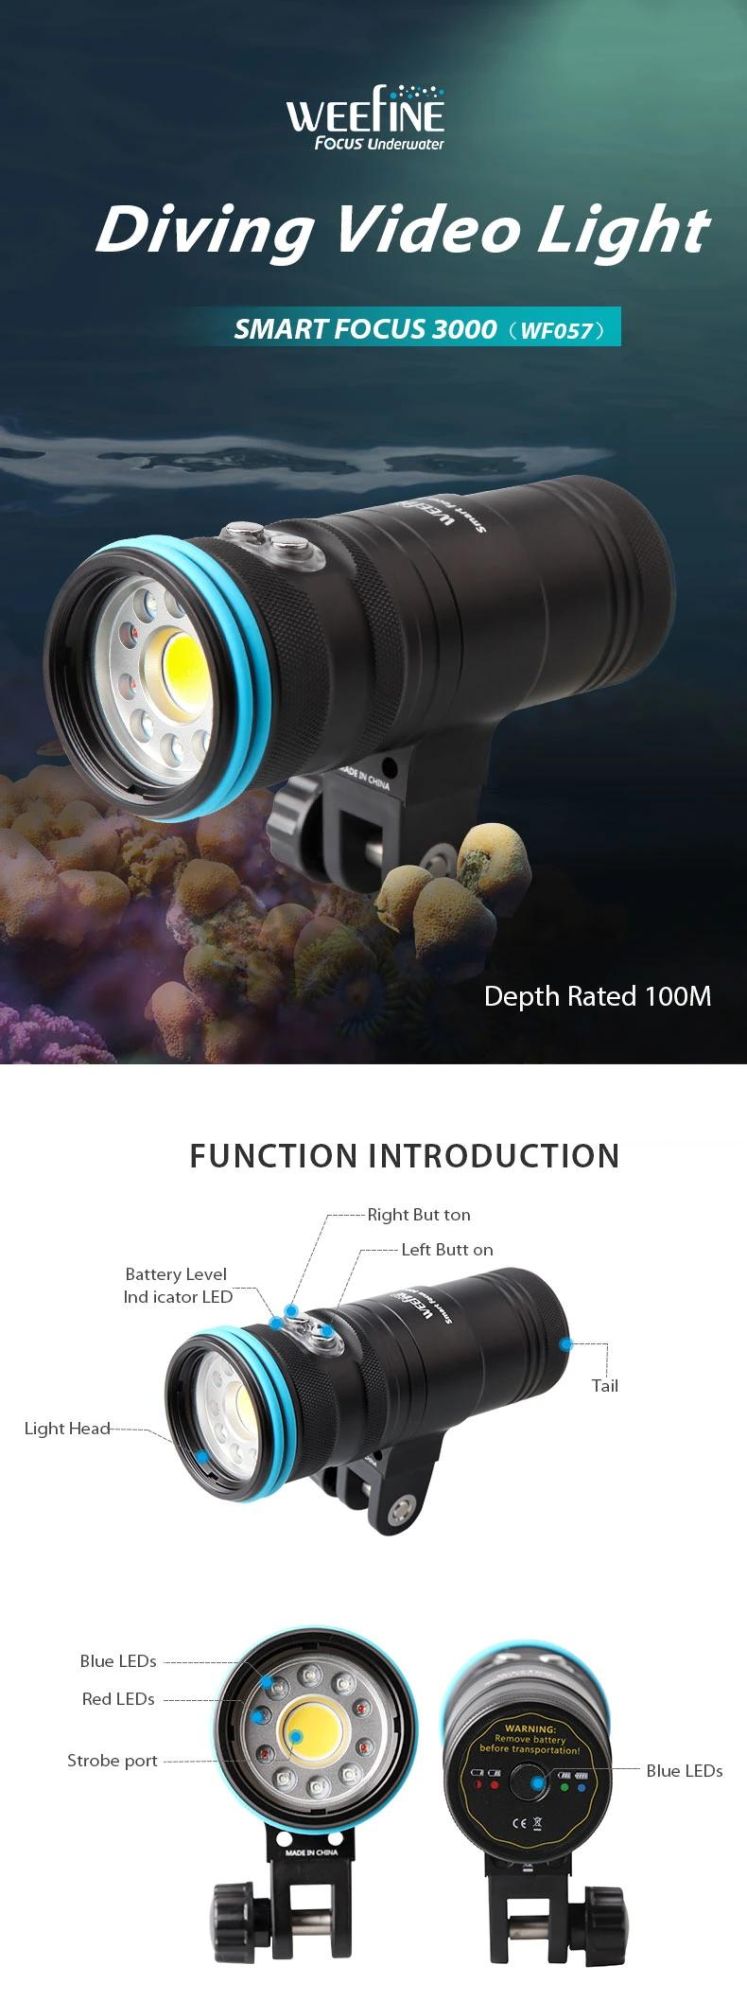 High-Quality COB LED Light Source Wide Angle Lighting Area Underwater Flashlight Lamp with Long Run Time